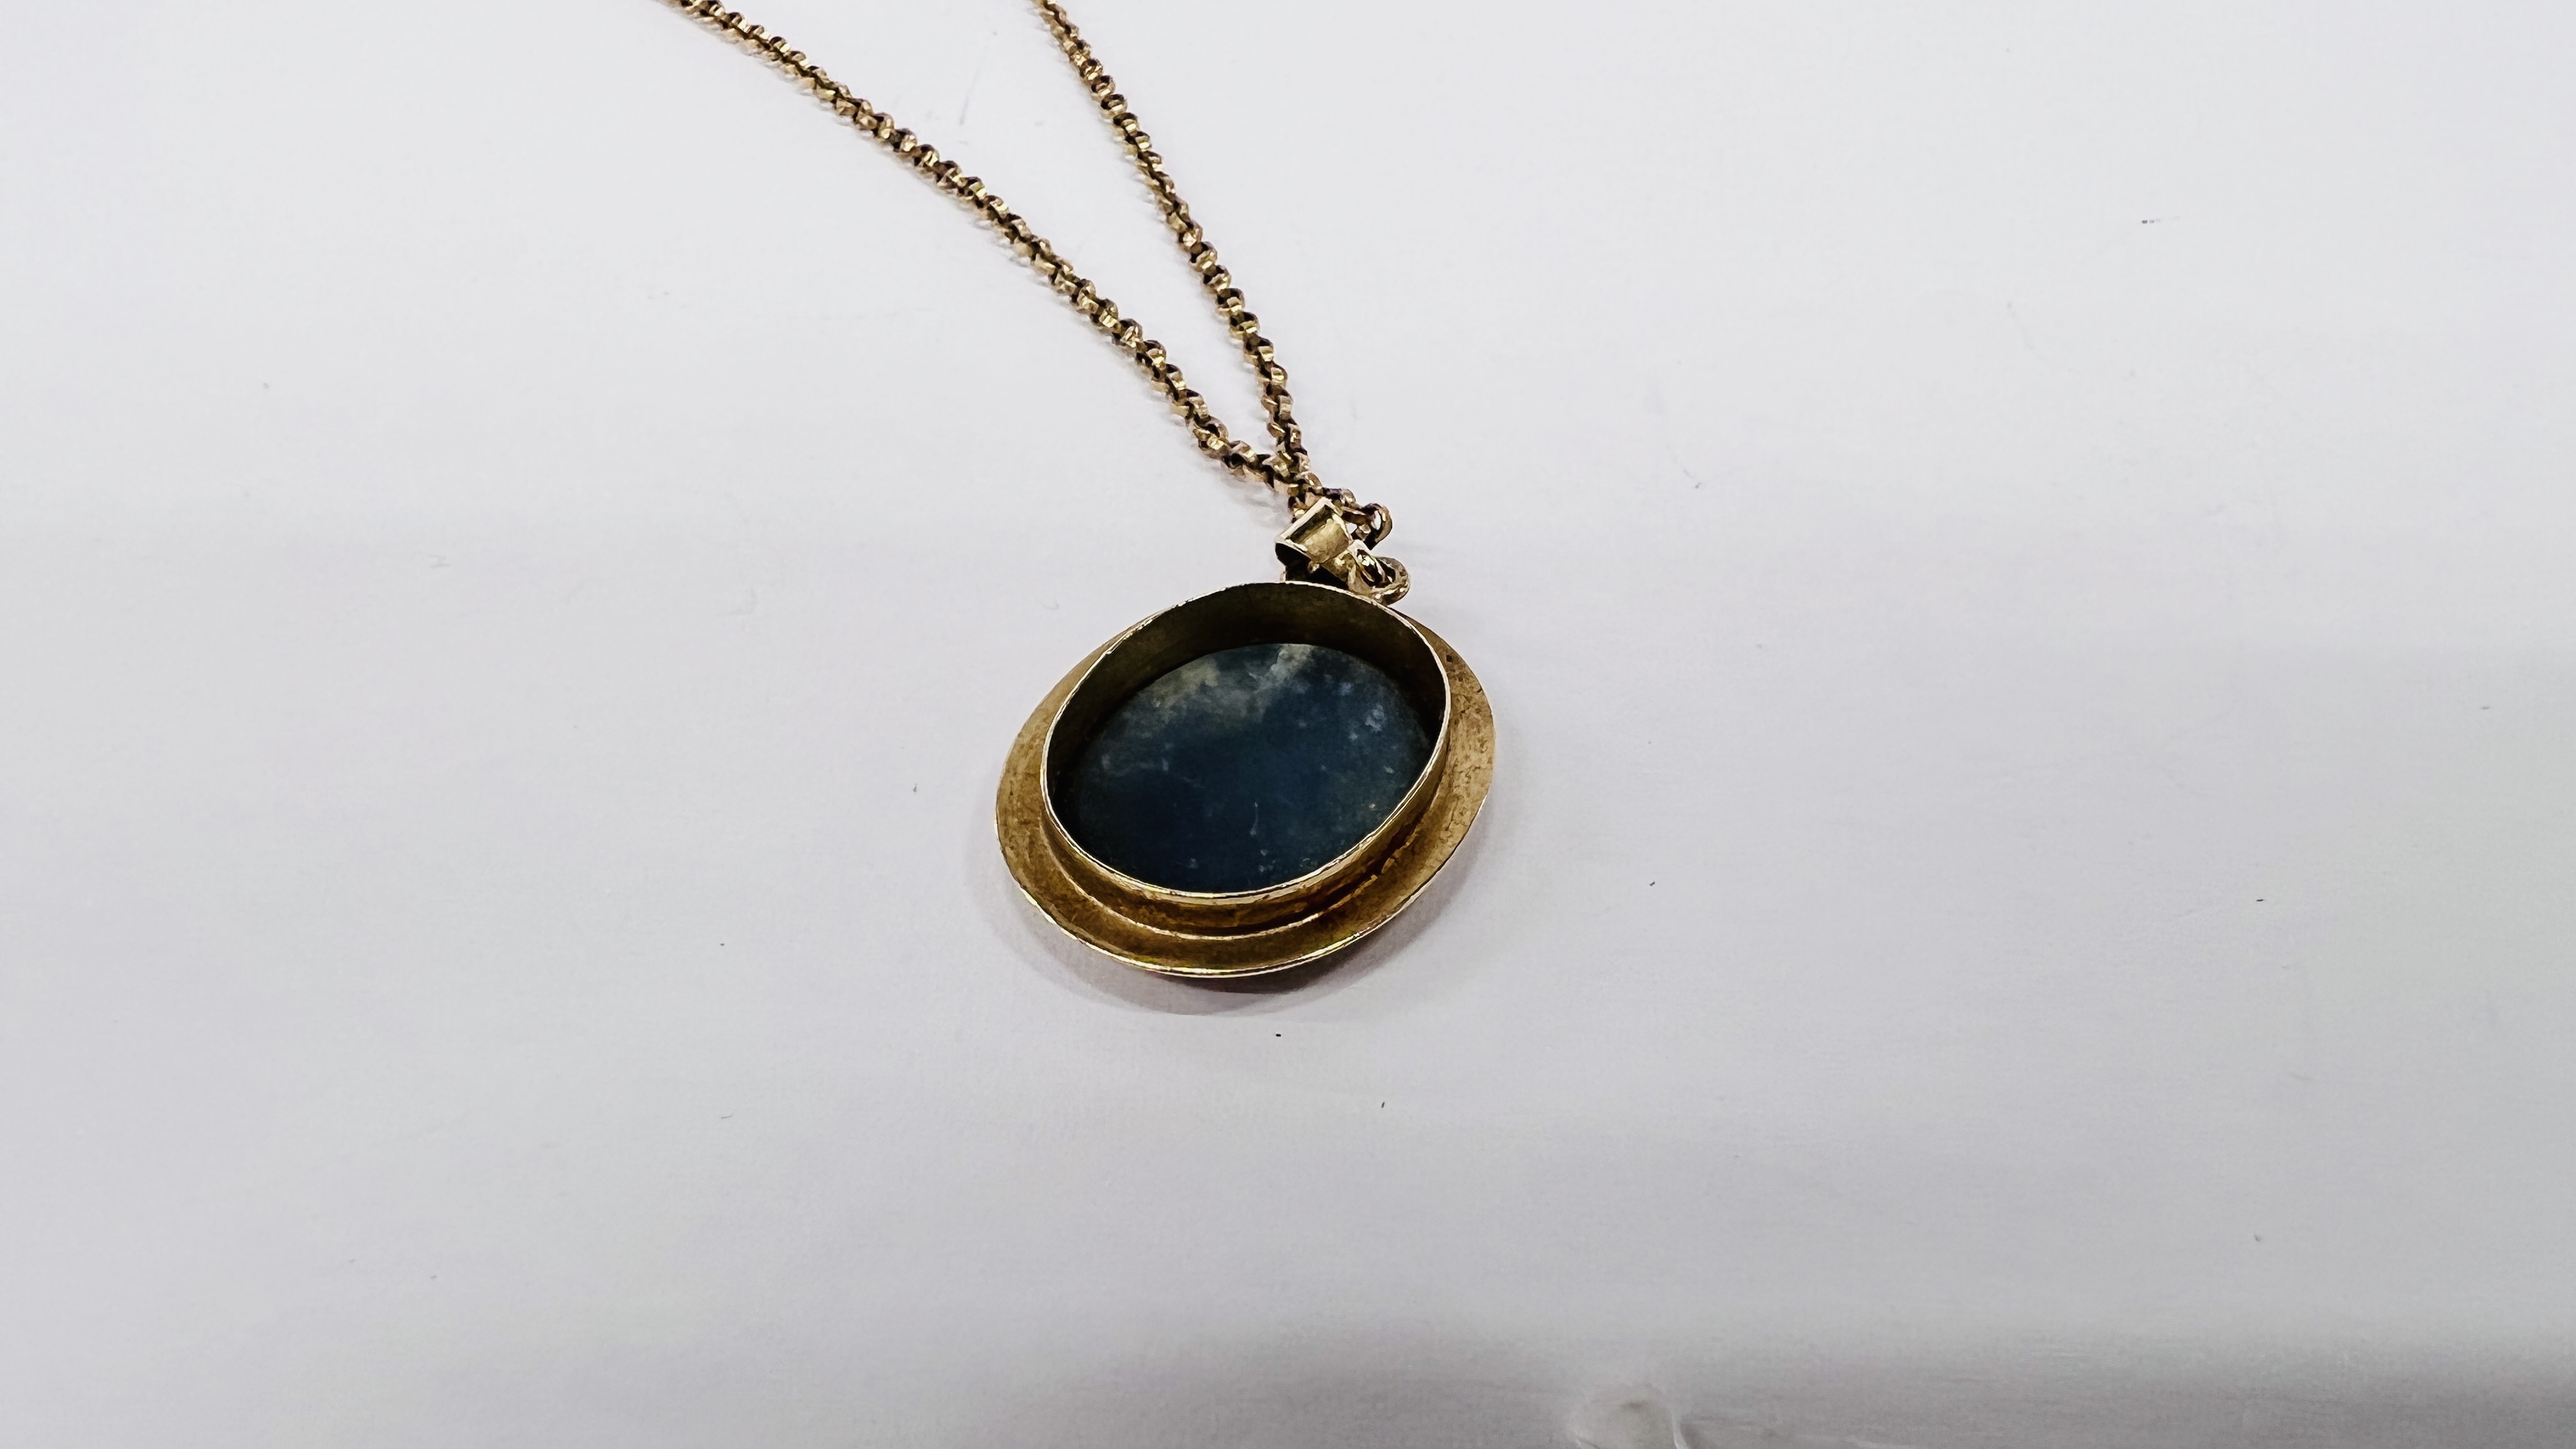 A 10CT PENDANT FRAMING AN OVAL OPAL ON A 9CT GOLD CHAIN. - Image 6 of 9